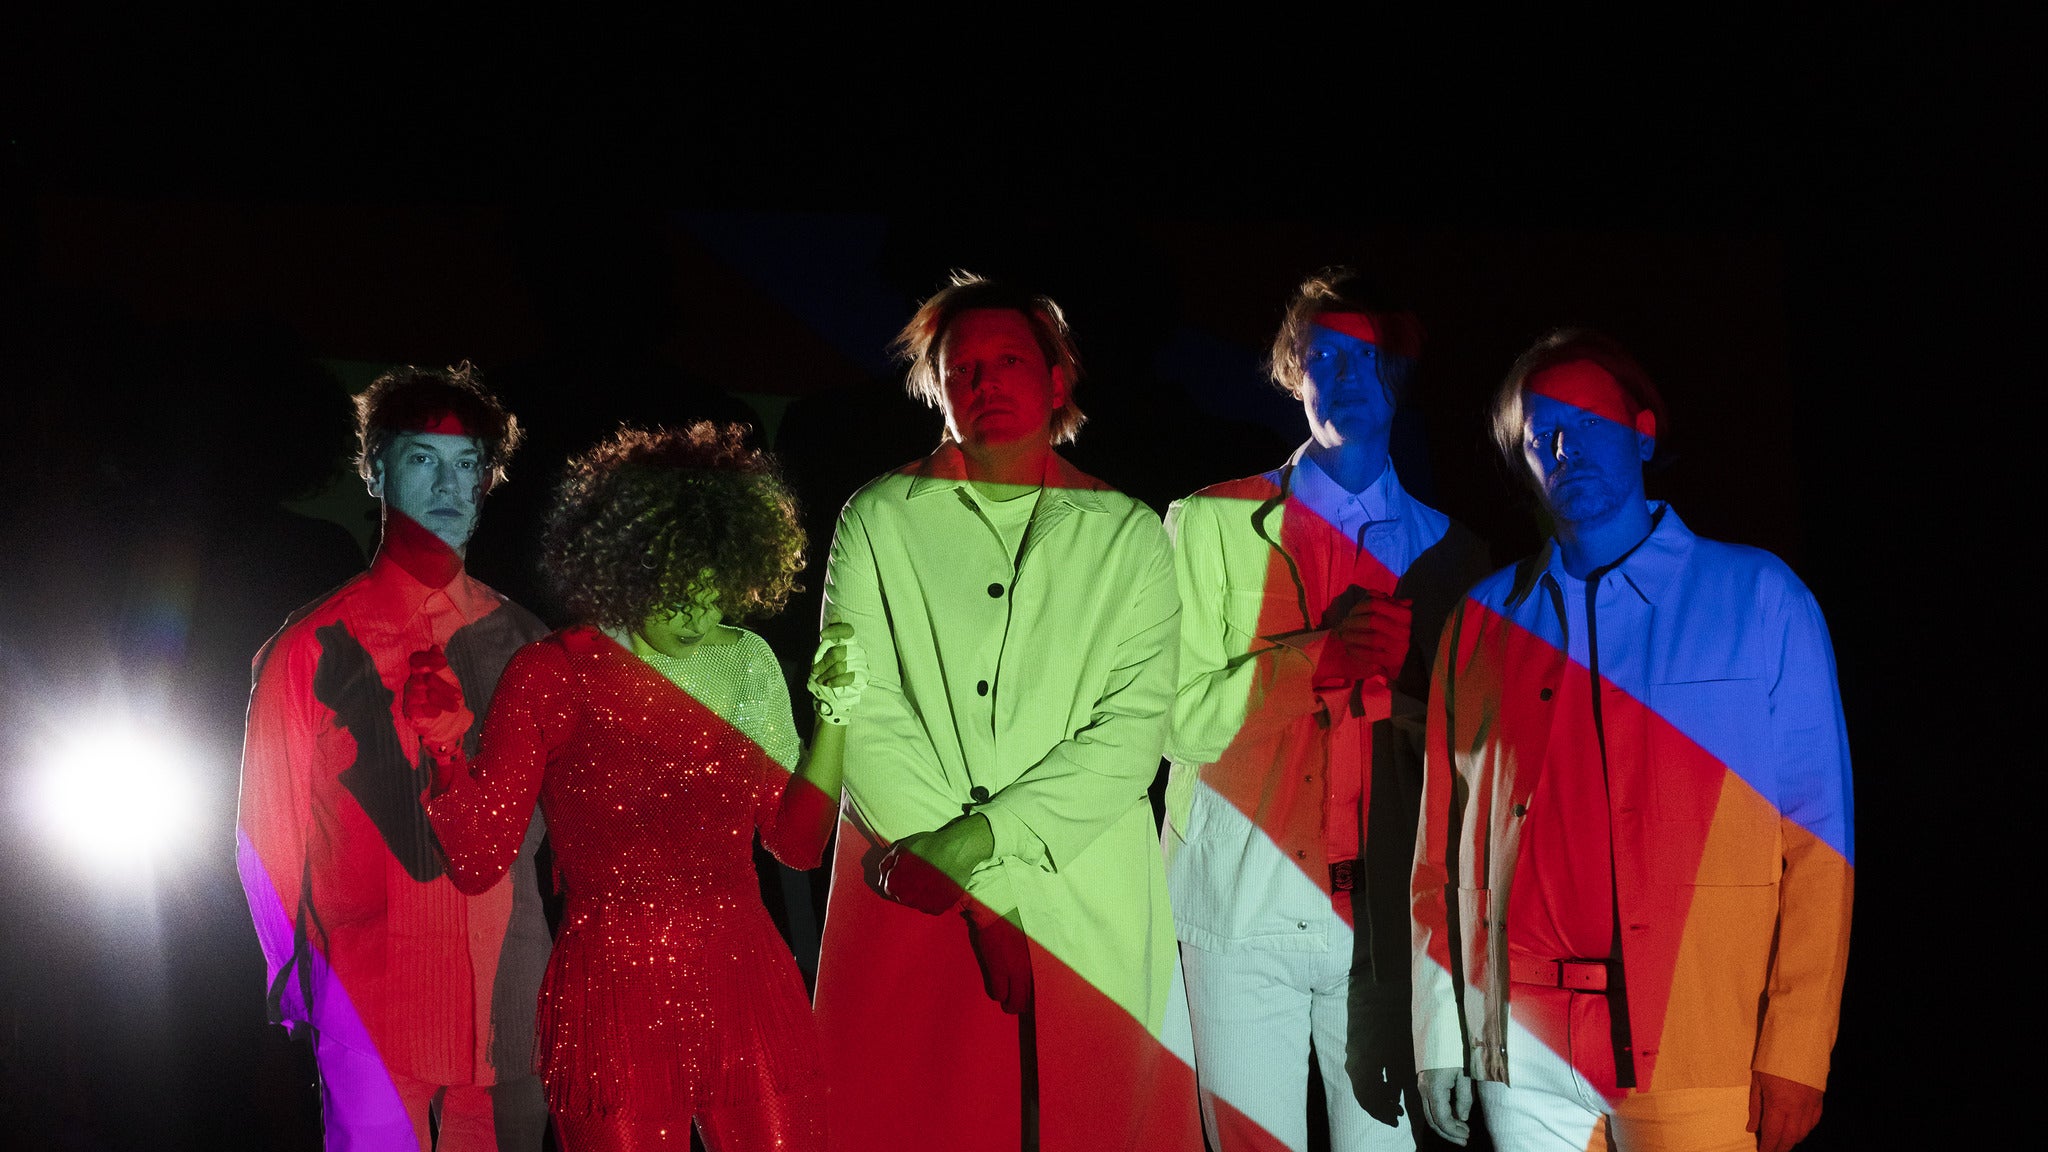 Arcade Fire Presents: the "We" Tour